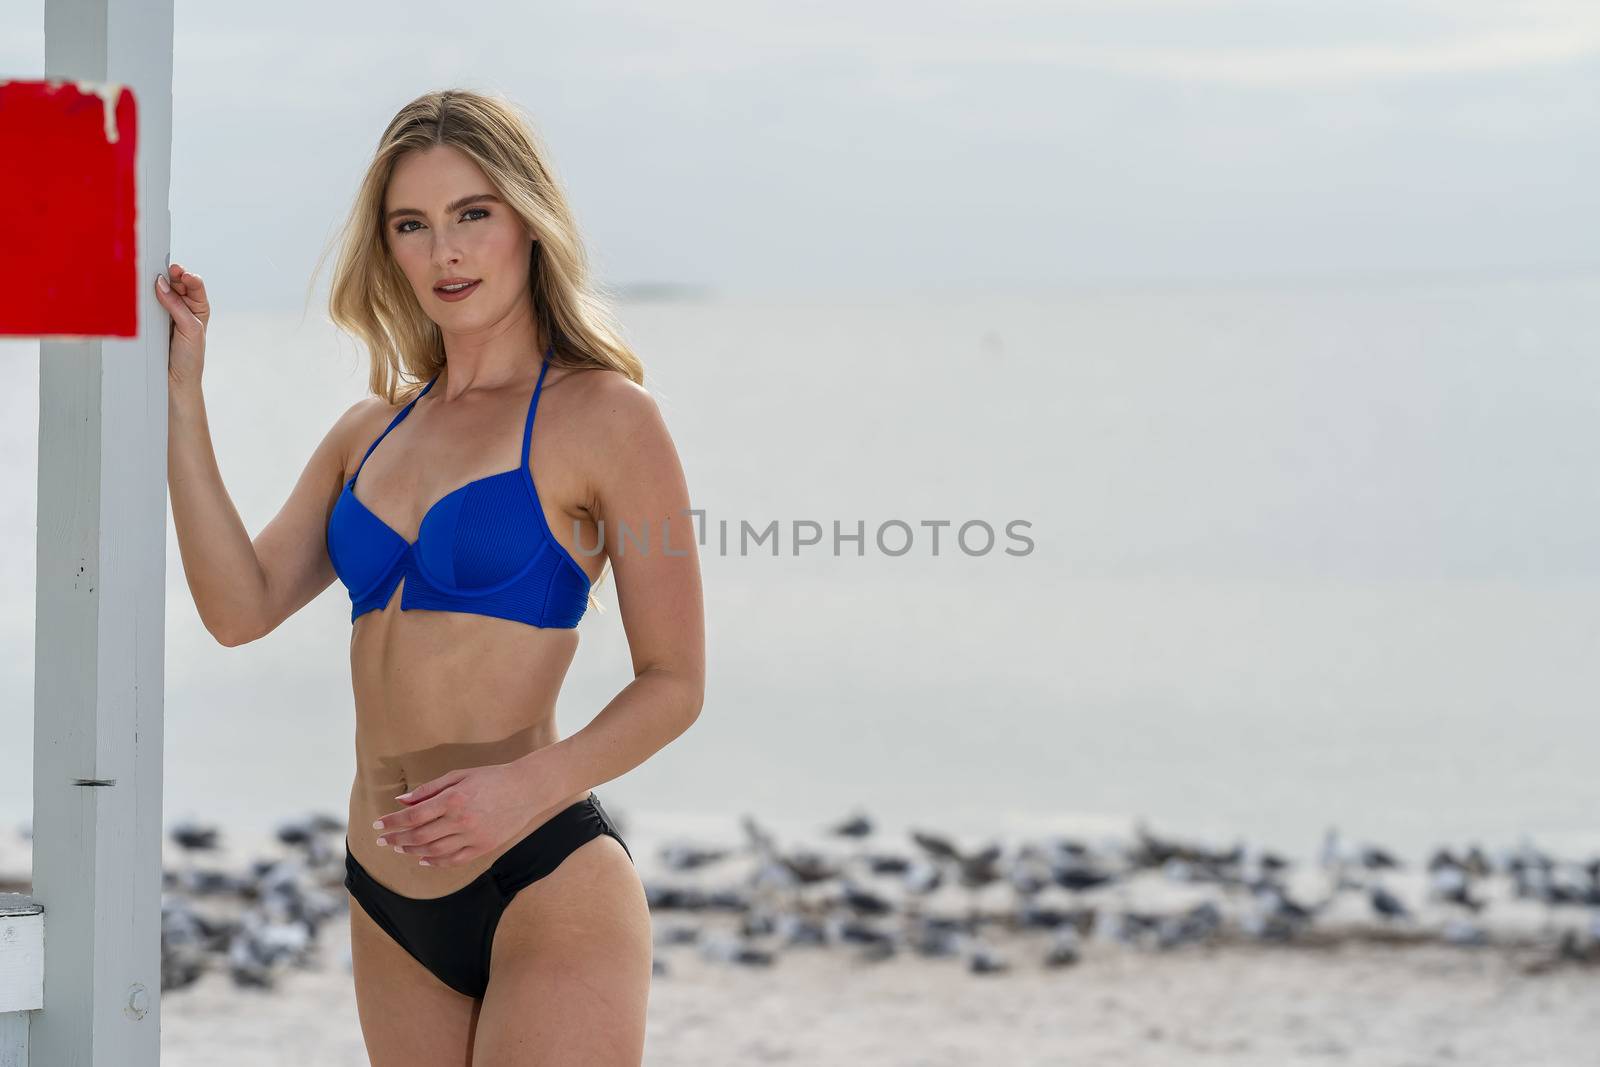 Lovely Blonde Bikini Model Posing Outdoors On A Caribbean Beach Near A Lifeguard Station by actionsports